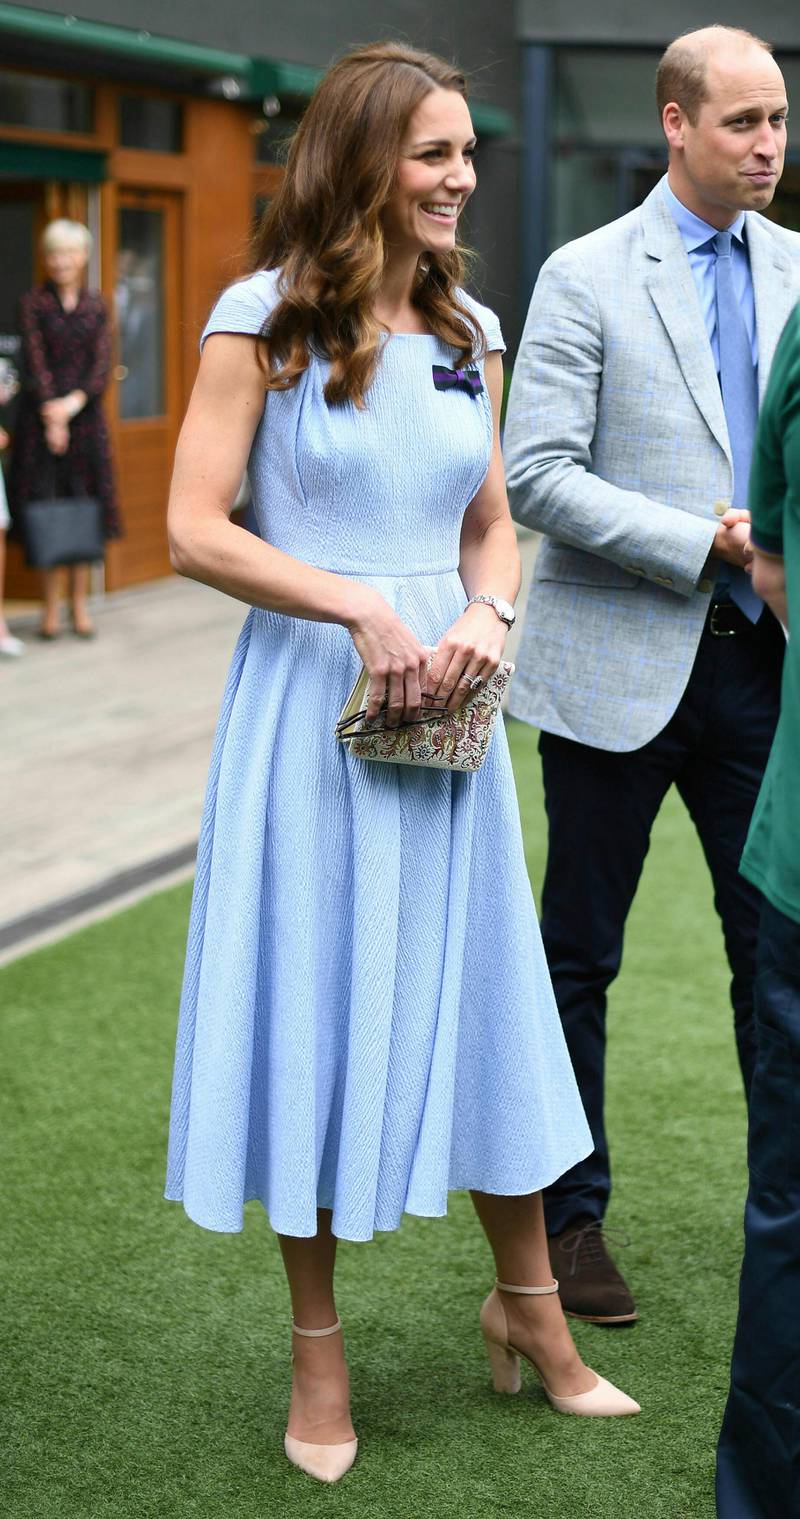 Wearing Emilia Wickstead, Kate, Duchess of Cambridge arrive ahead of the Men's Singles Final on day thirteen of the Wimbledon Championships at the All England Lawn Tennis and Croquet Club, in London, Sunday, July 14, 2019. Photo: AP